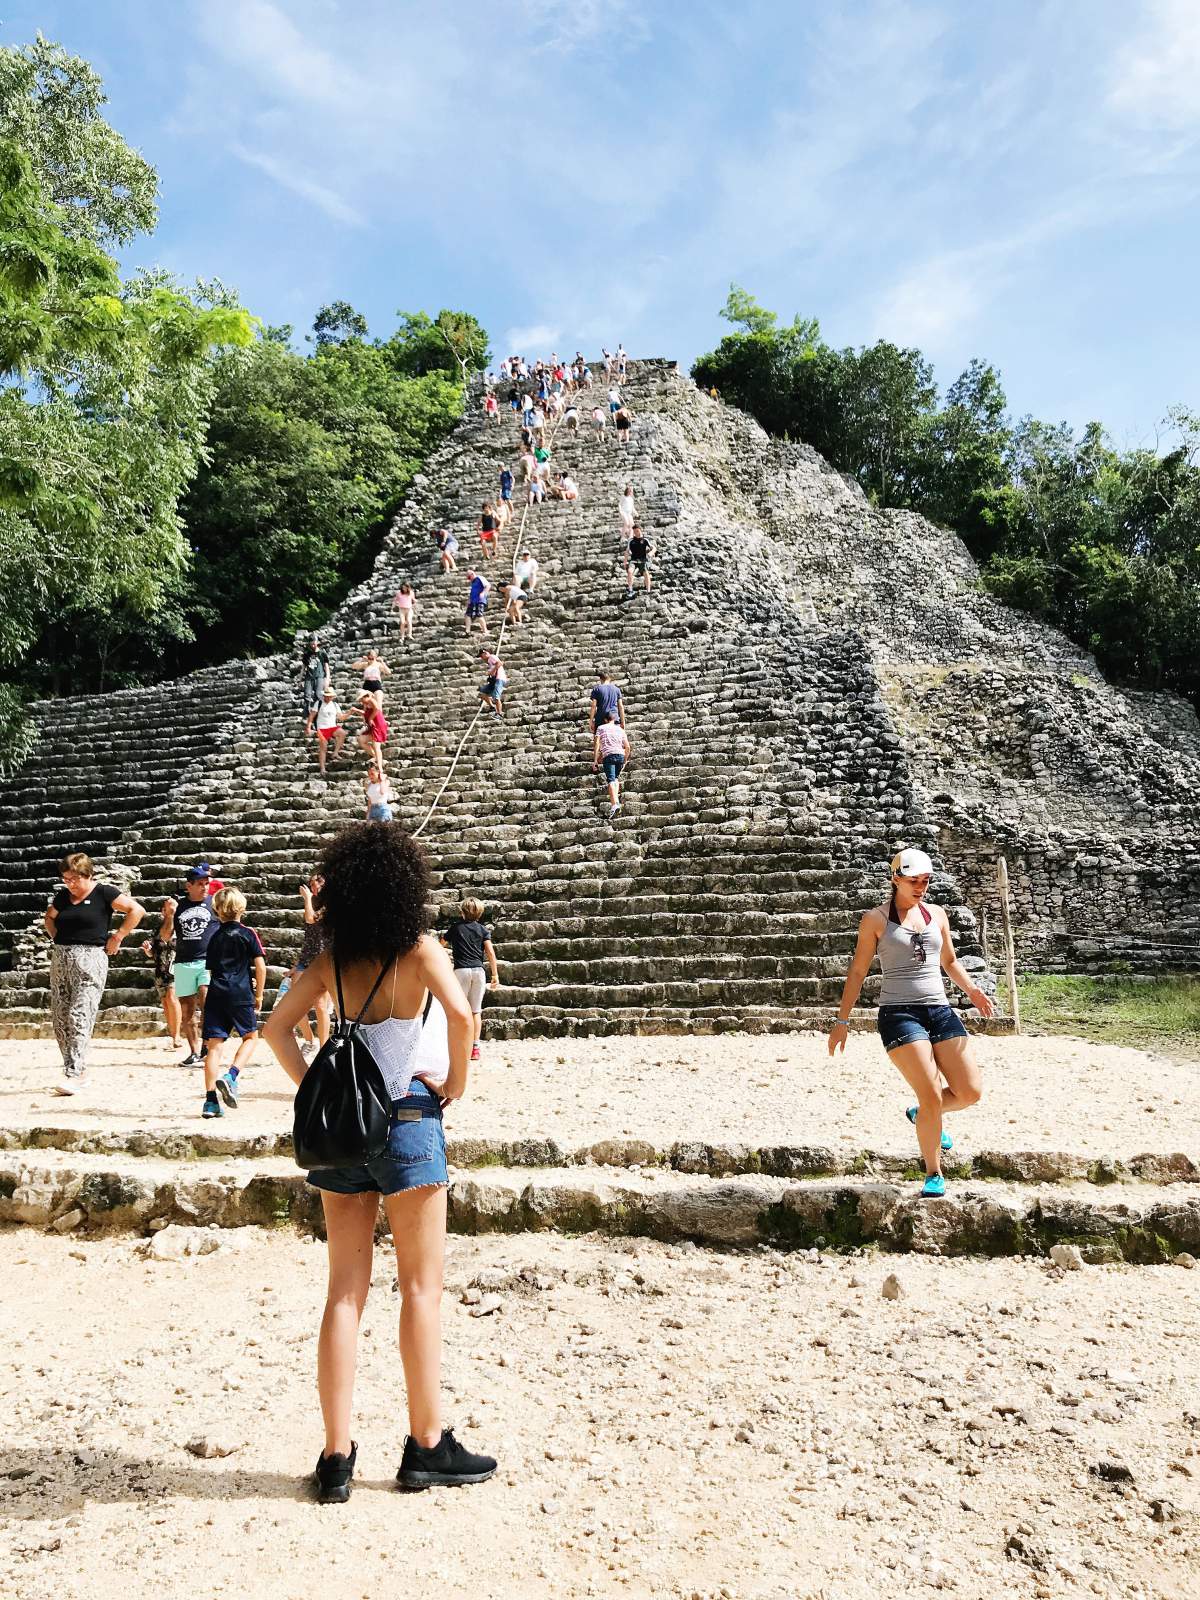 Hayla, Air Transat Flight Director, in front of the Coba mayan pyramid